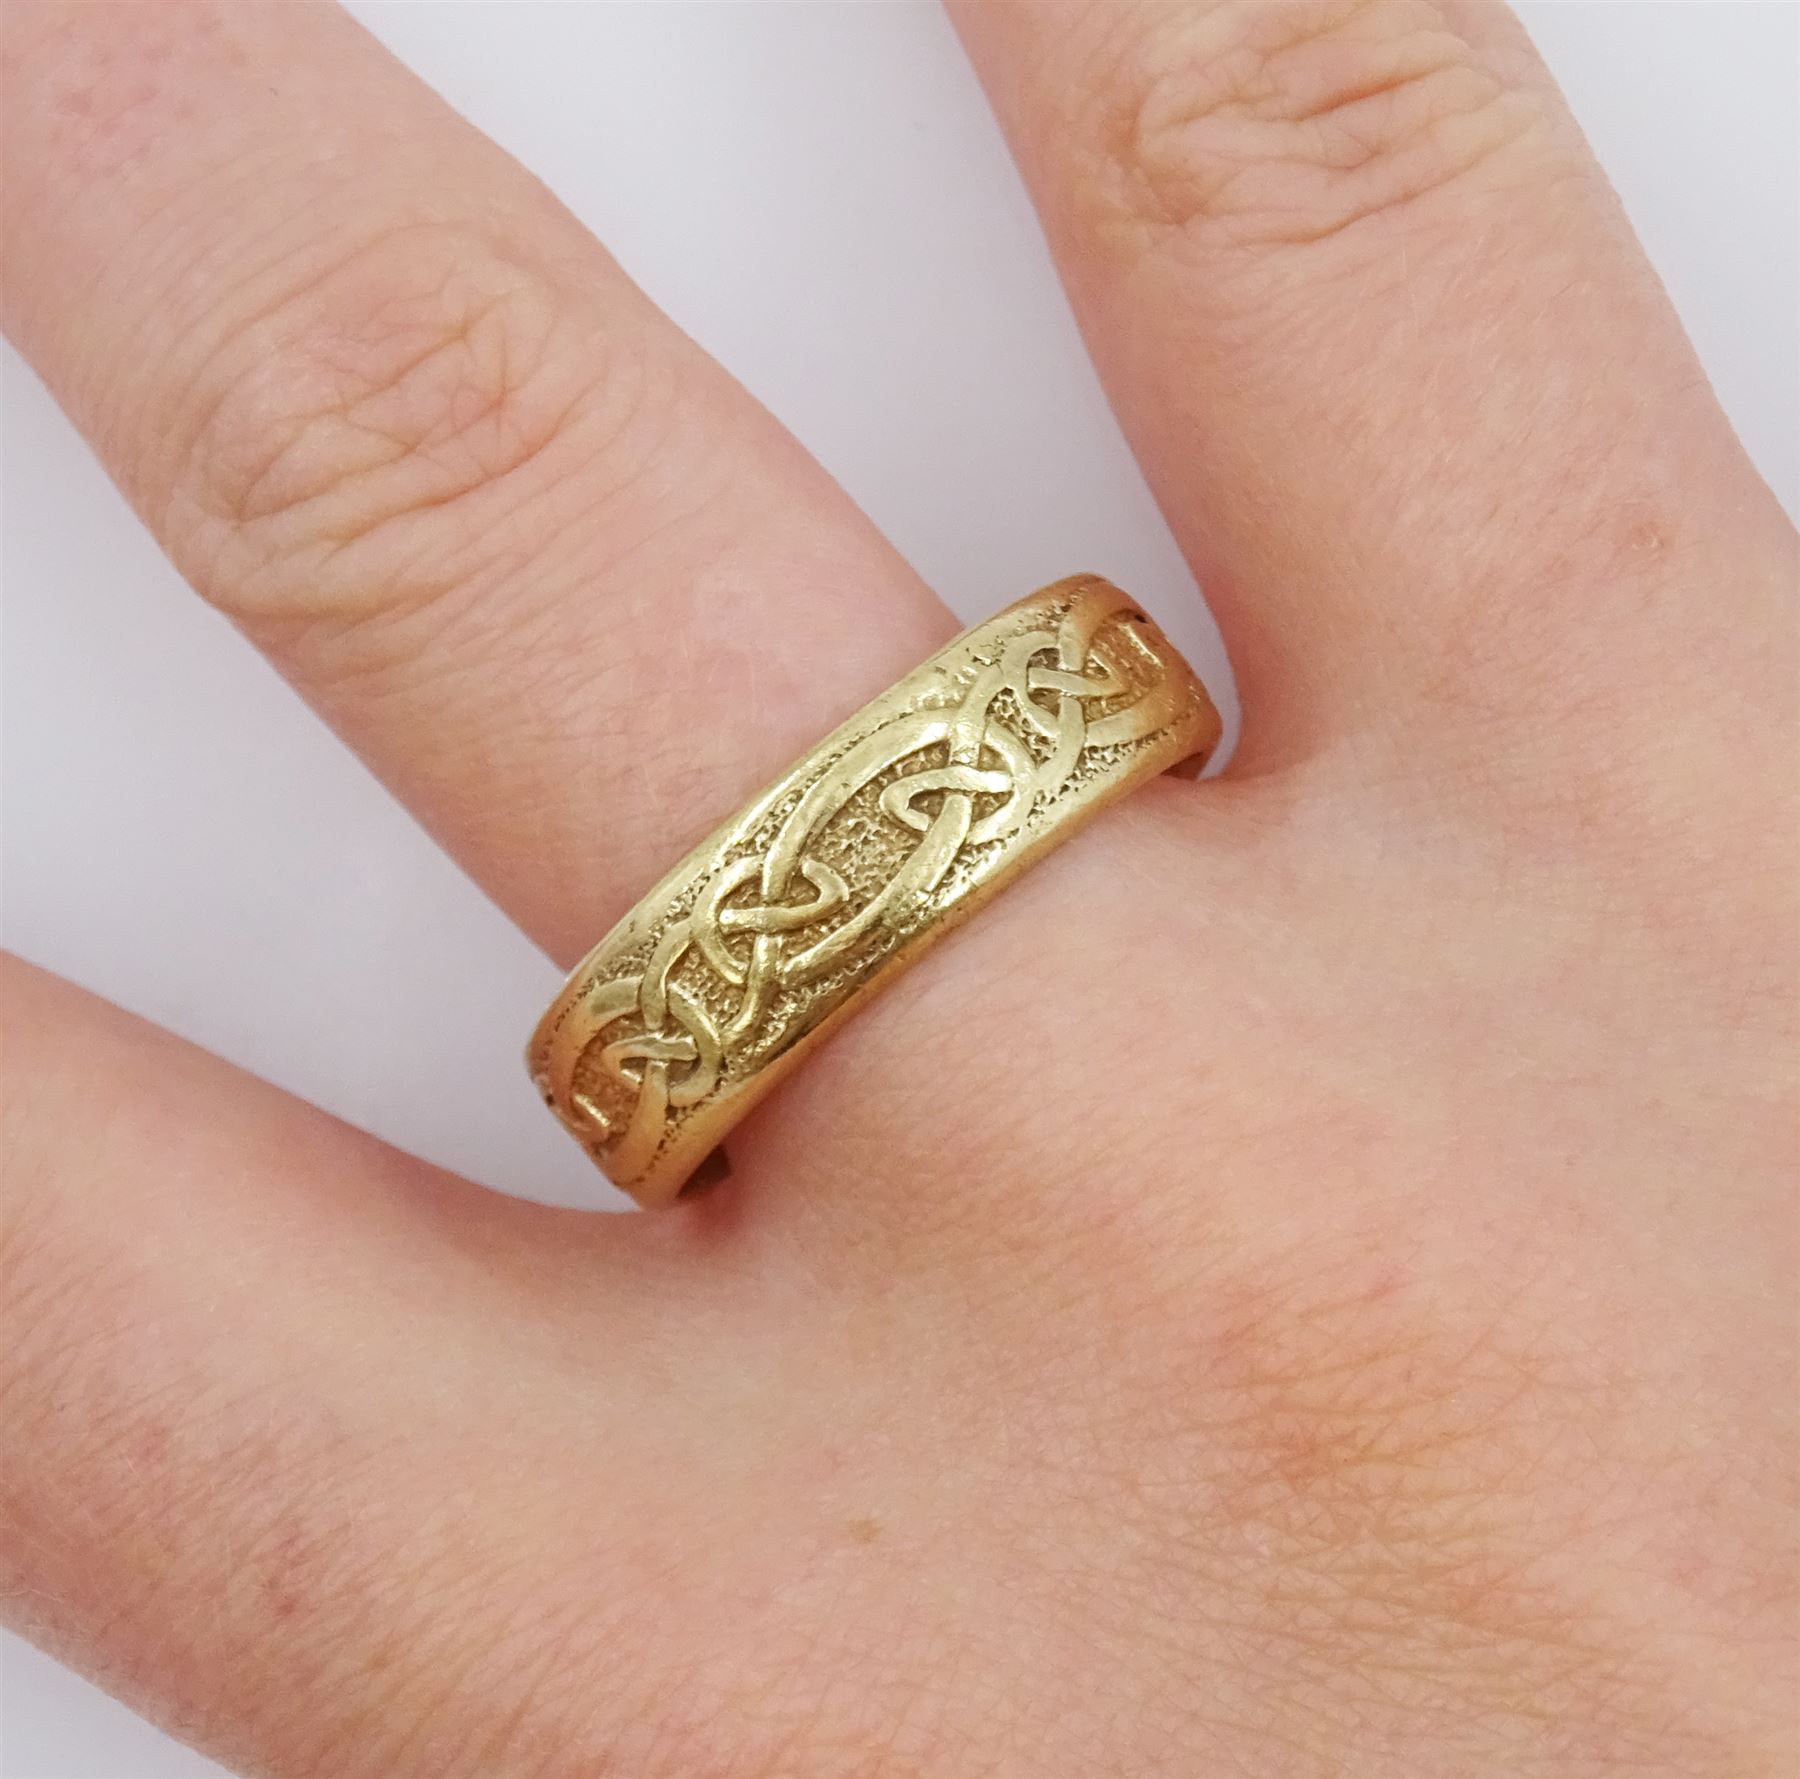 9ct gold Celtic deign ring - Image 2 of 3